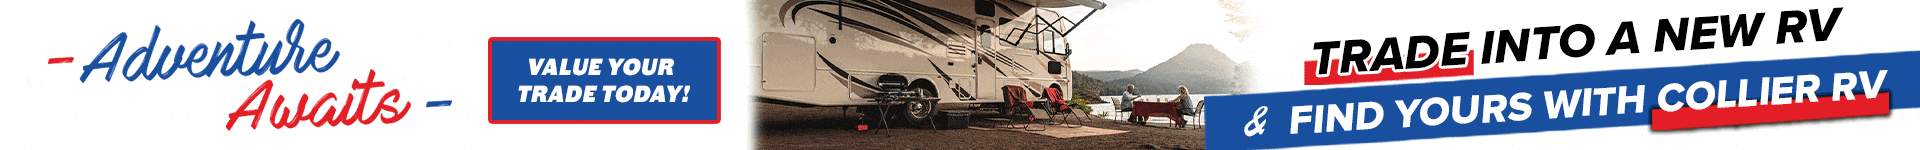 Trade in your RV at Collier RV